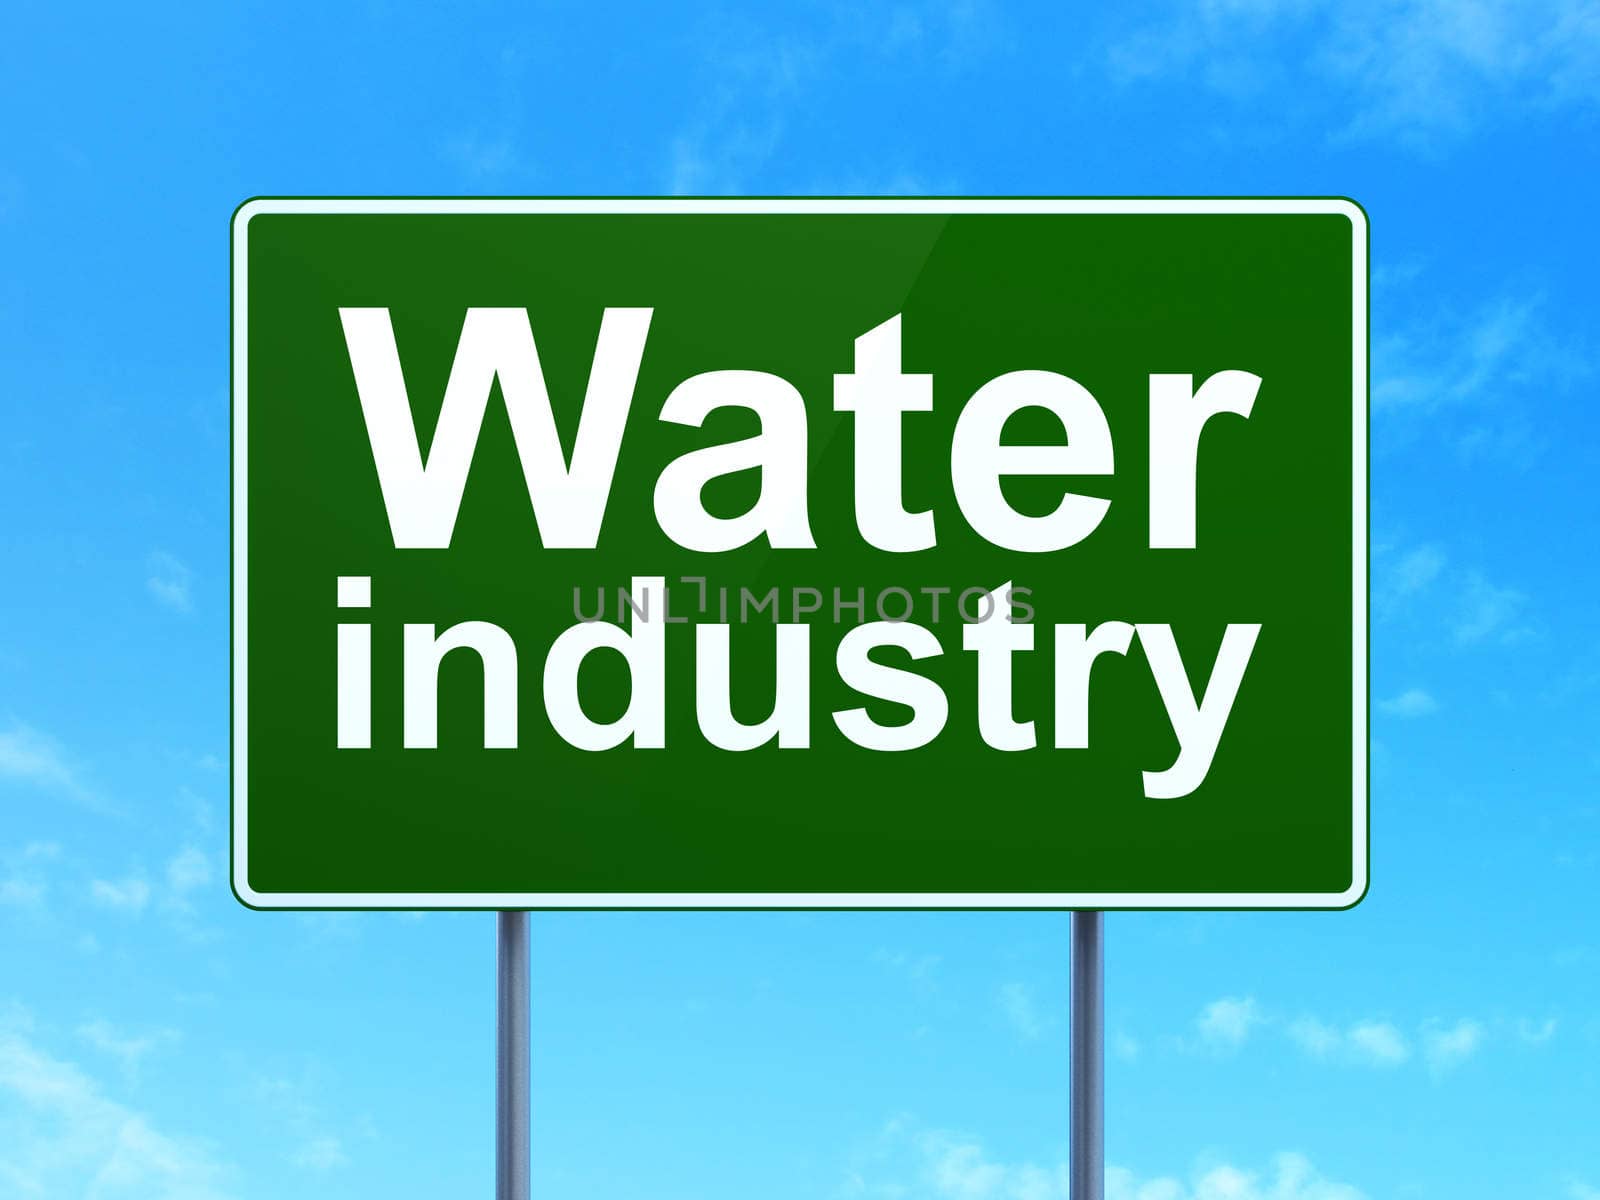 Industry concept: Water Industry on green road highway sign, clear blue sky background, 3d render